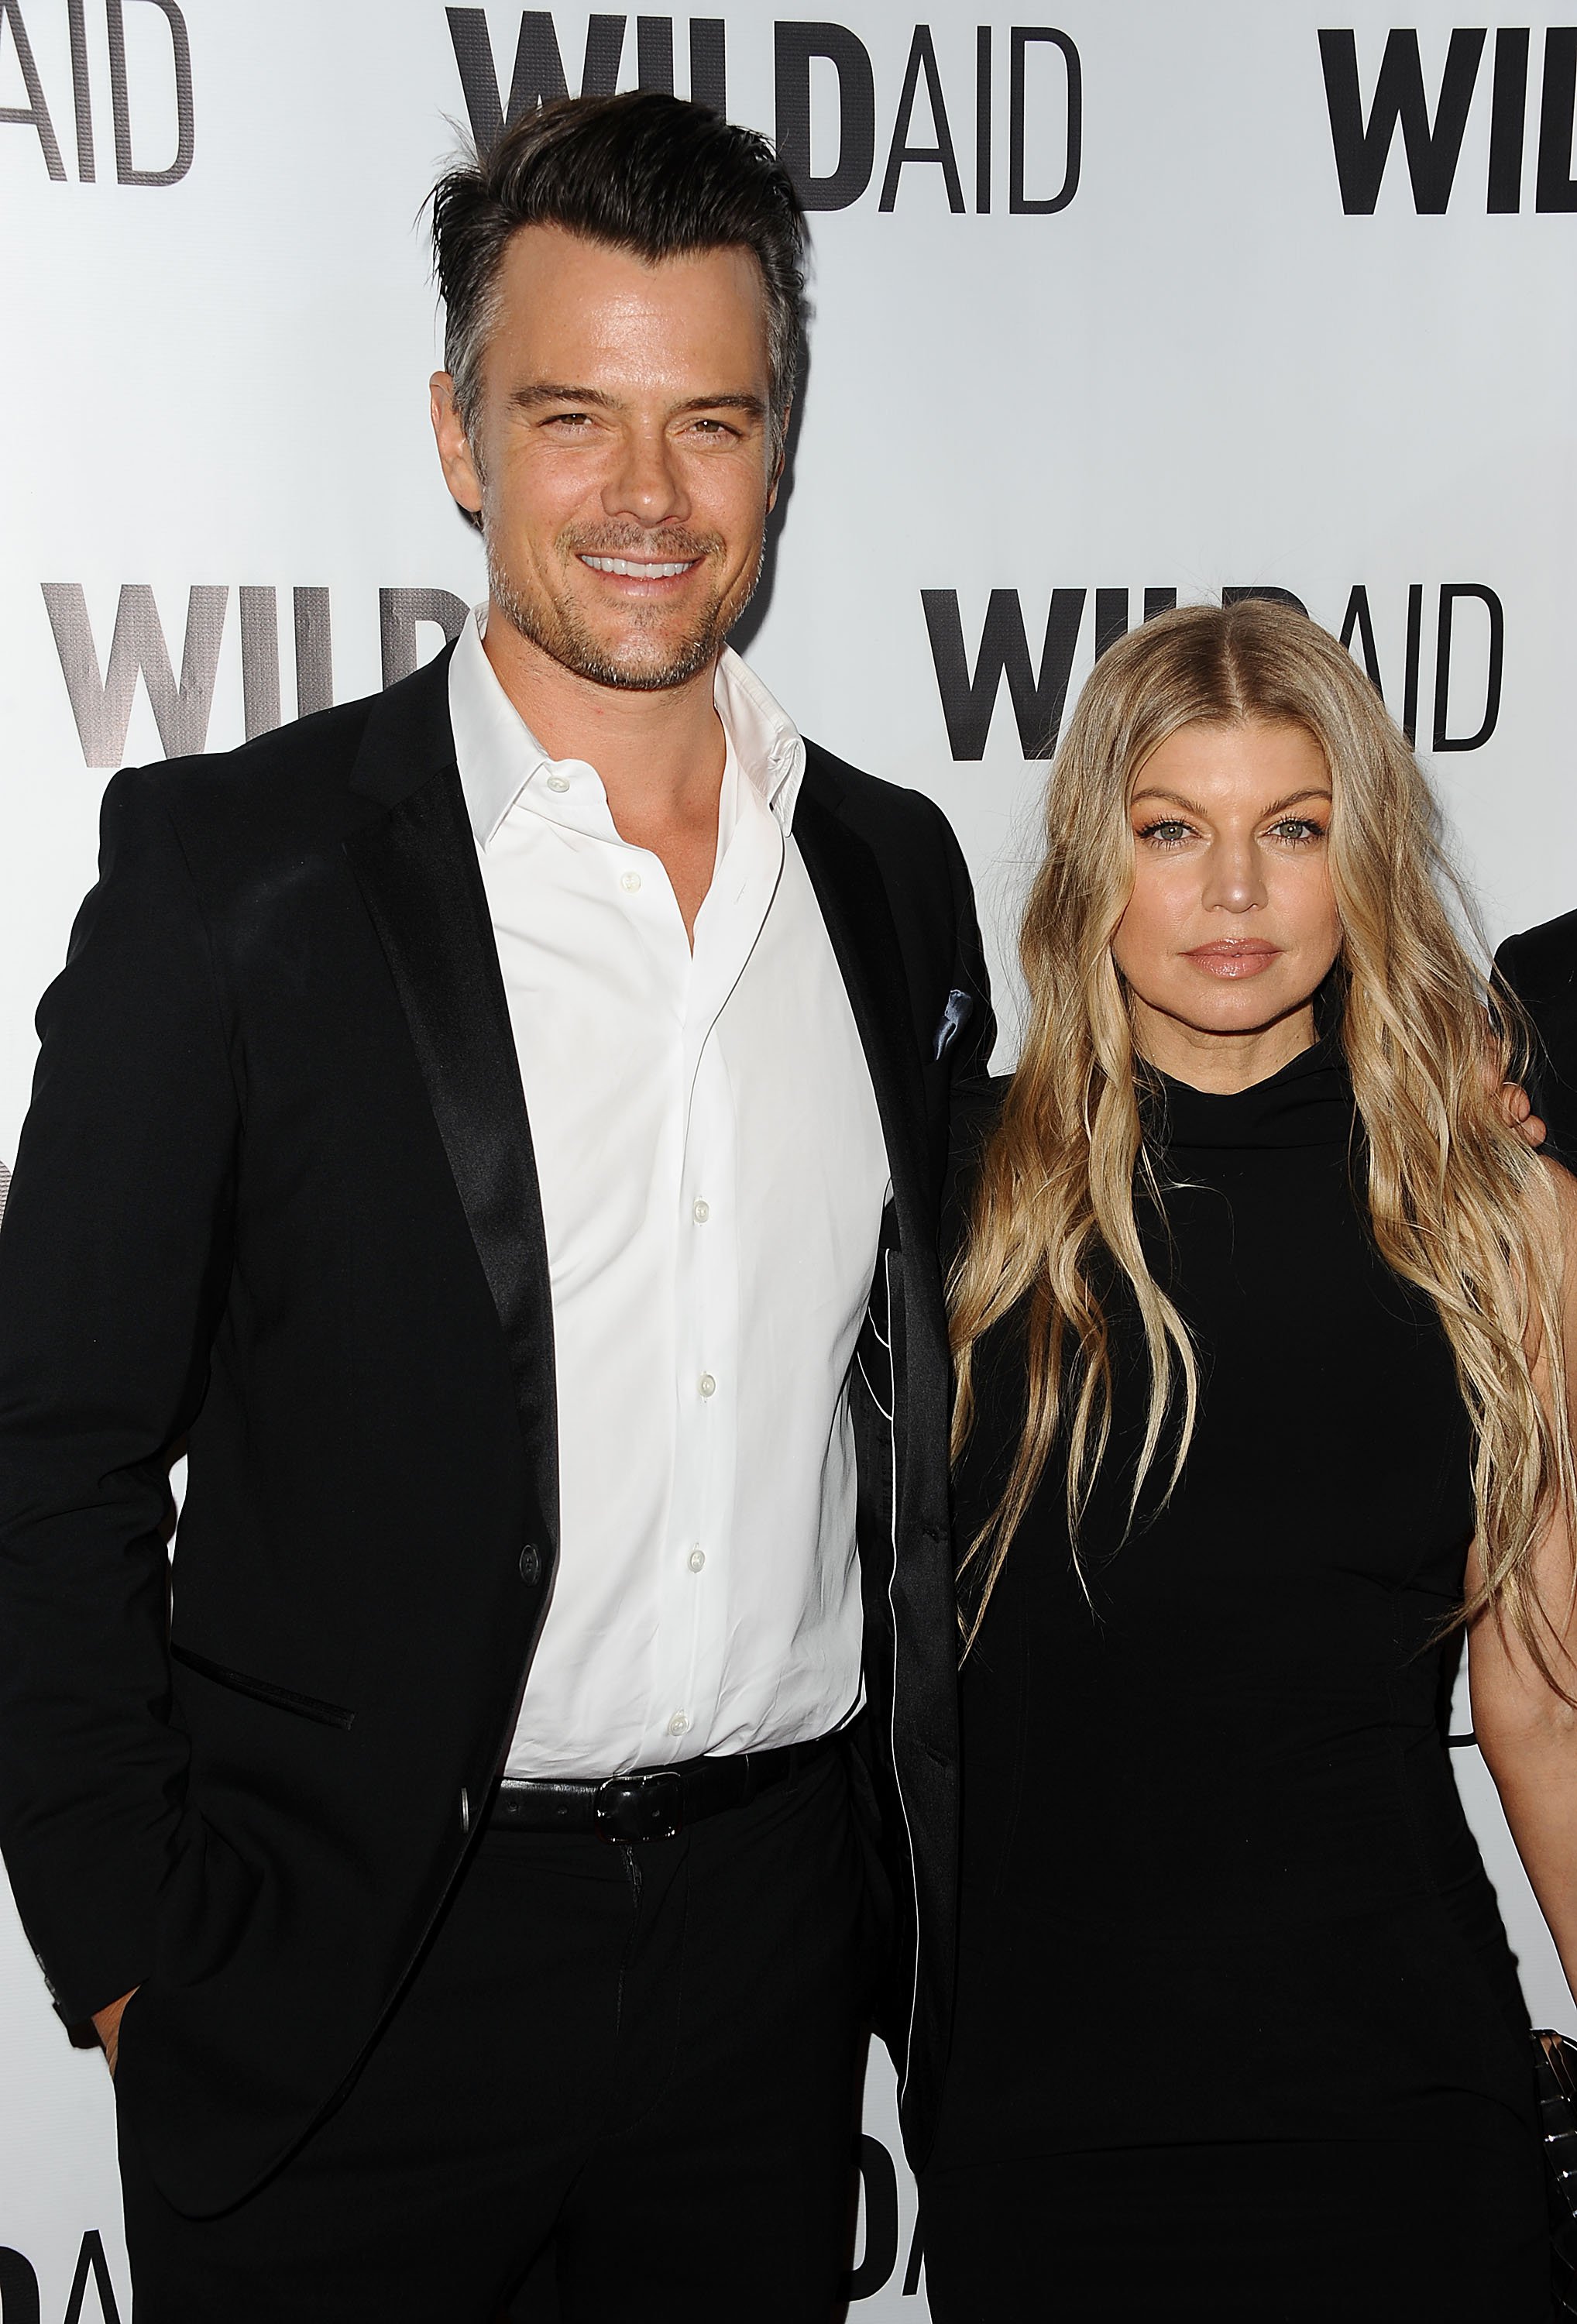 Josh Duhamel and Fergie at the WildAid 2015 on November 7, 2015 | Source: Getty Images